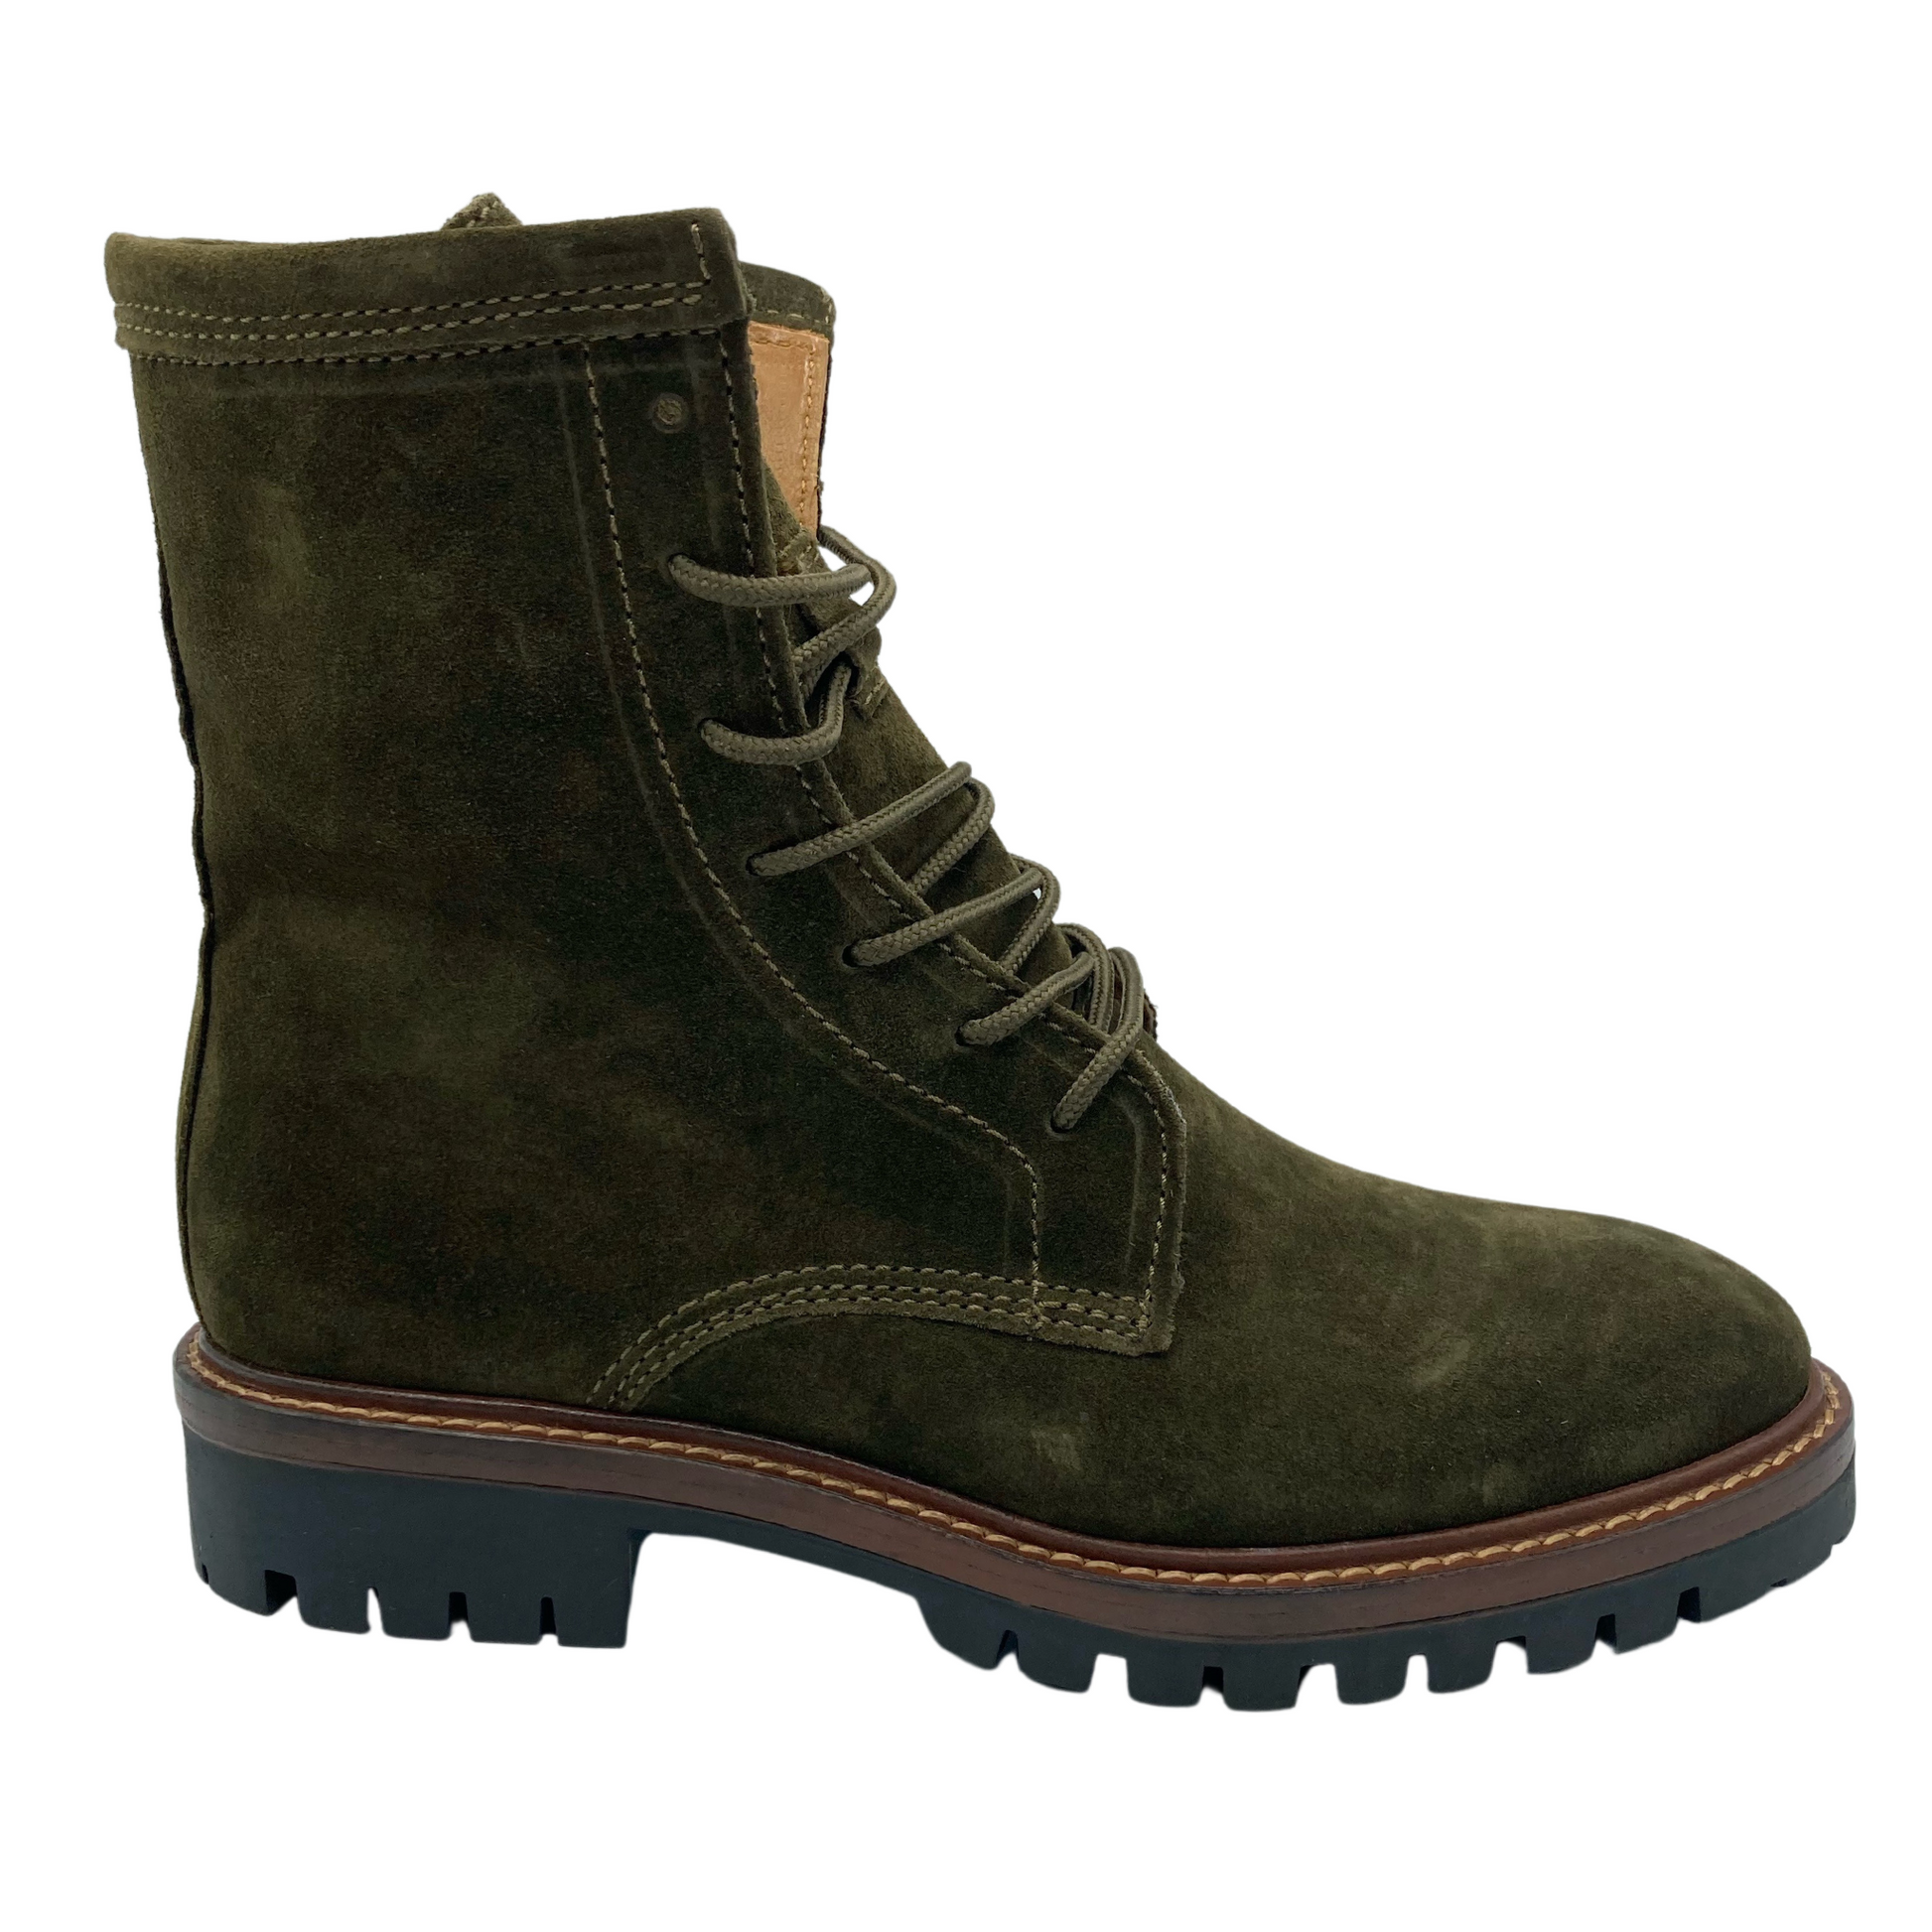 Right facing view of army green suede boot with lace up front and black treaded sole